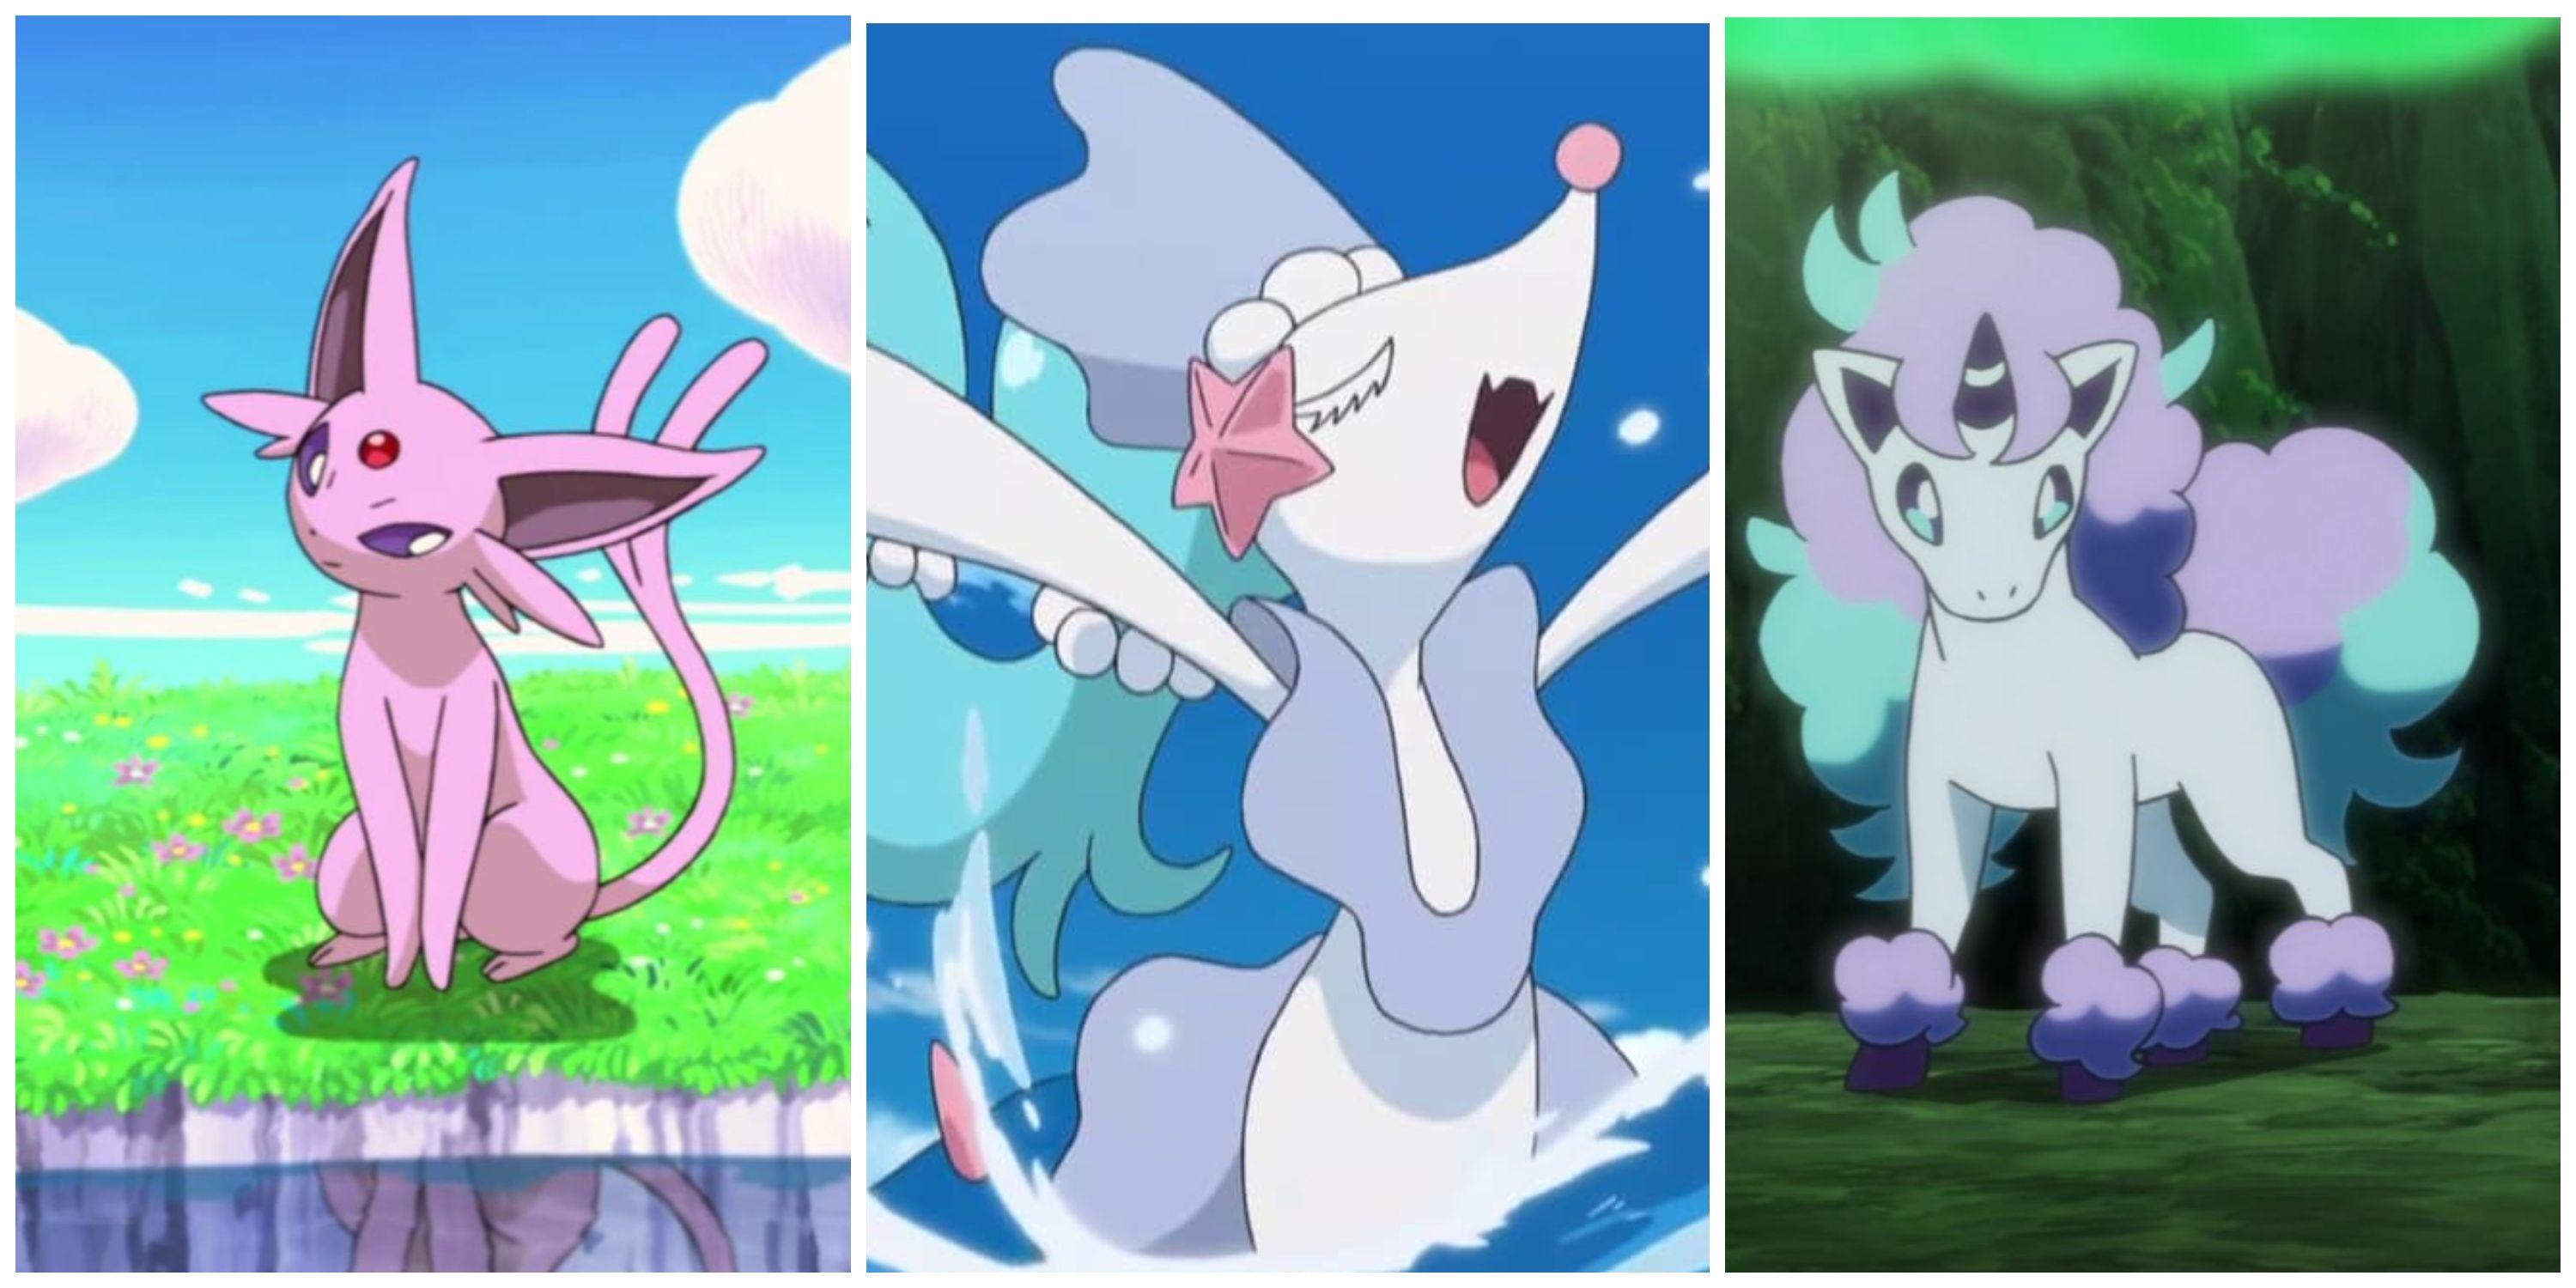 Why Pokémon Fans are Split on the New Mythical